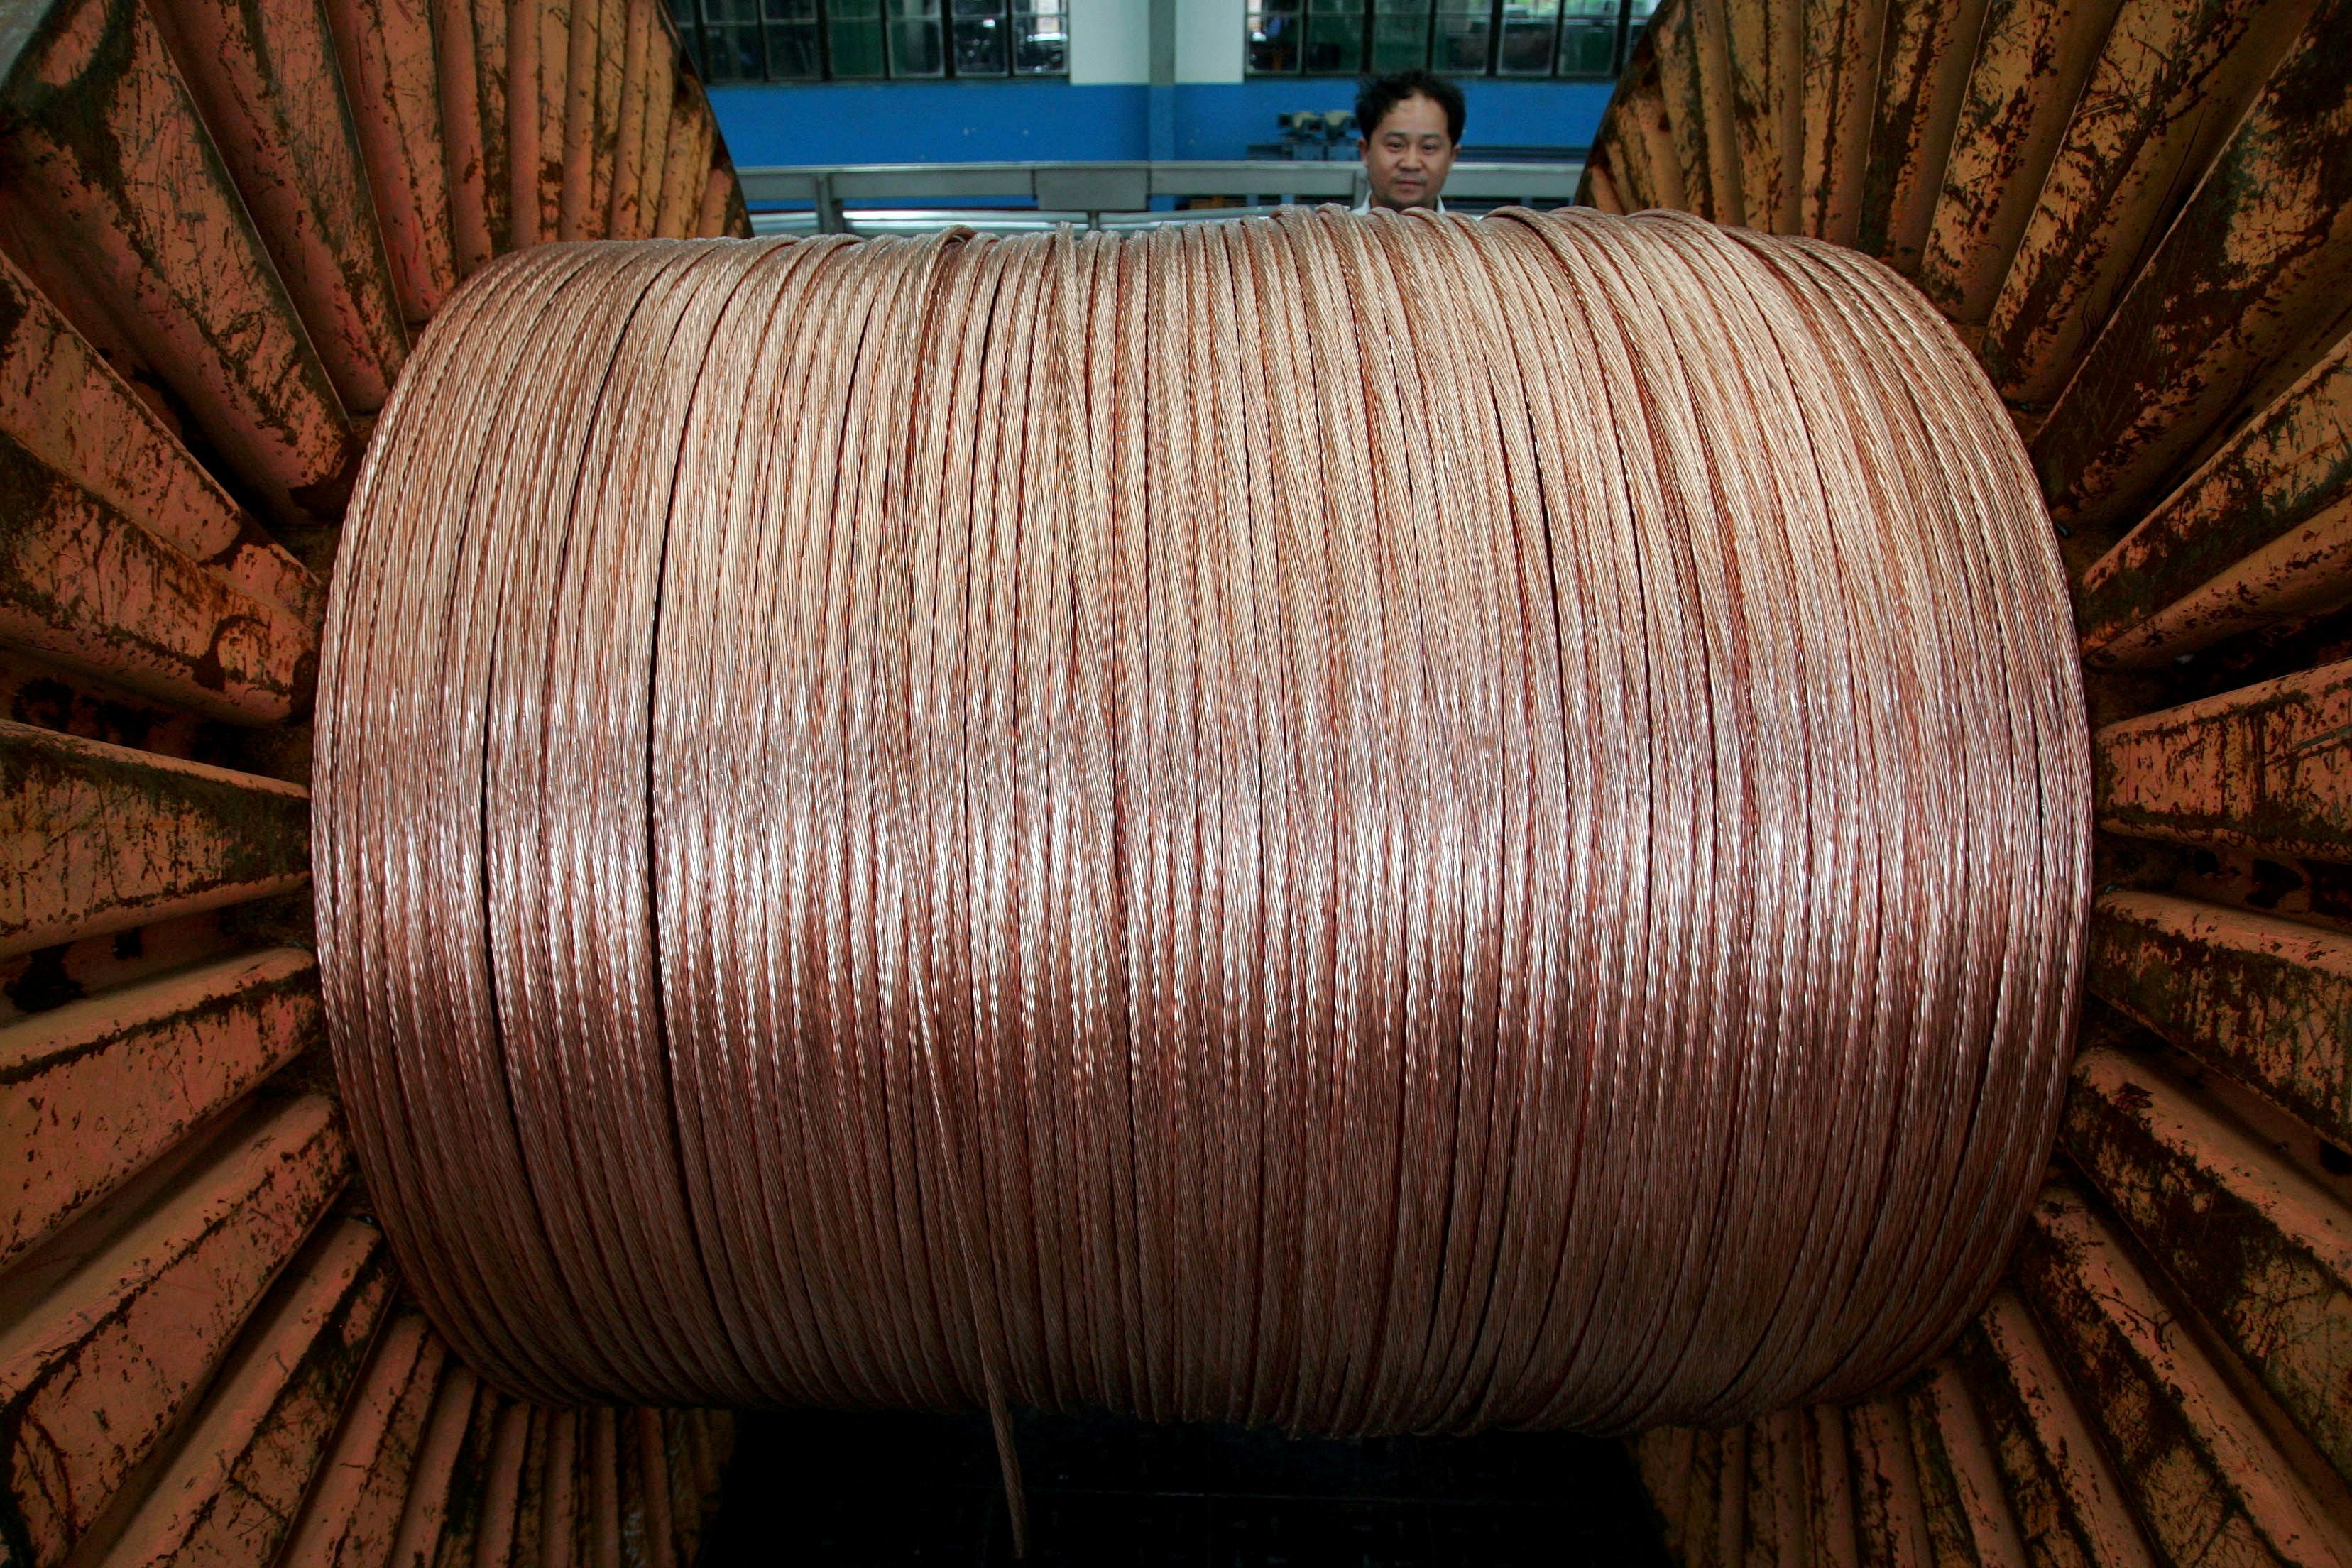 An employee works at an electricity cable factory in Baoying, Jiangsu province, China